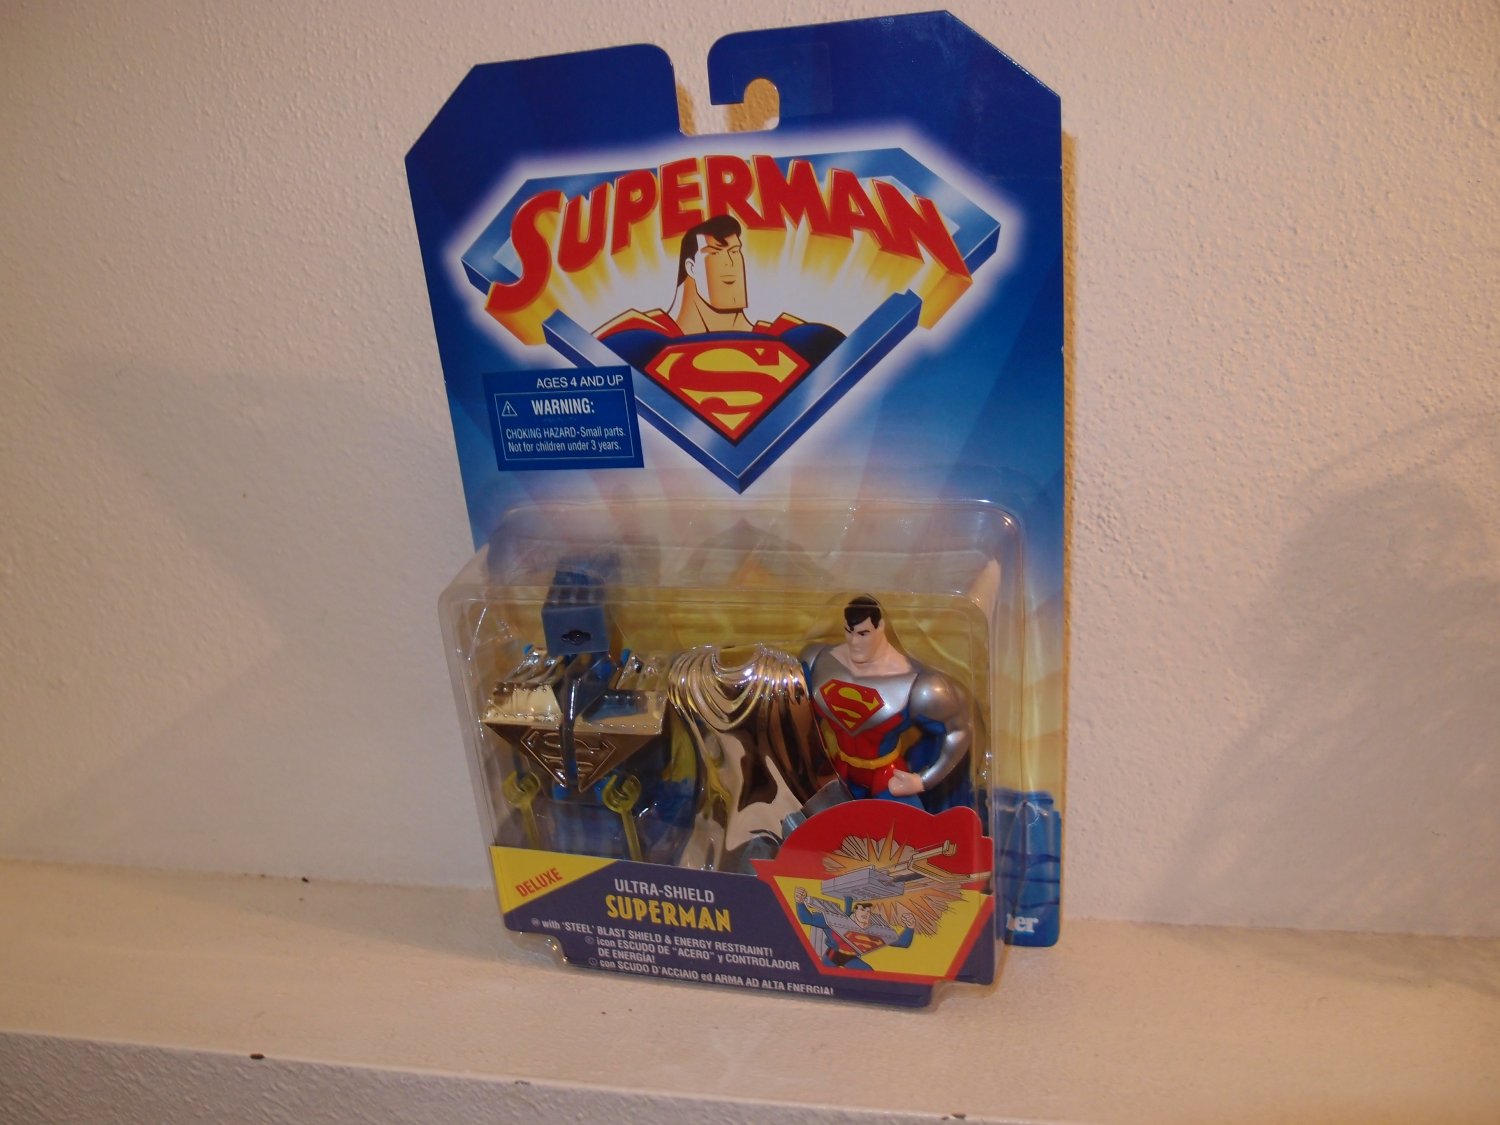 SUPERMAN ANIMATED DELUXE LOOSE ULTRA SHIELD SUPERMAN ACTION FIGURE 1998 KENNER HASBRO